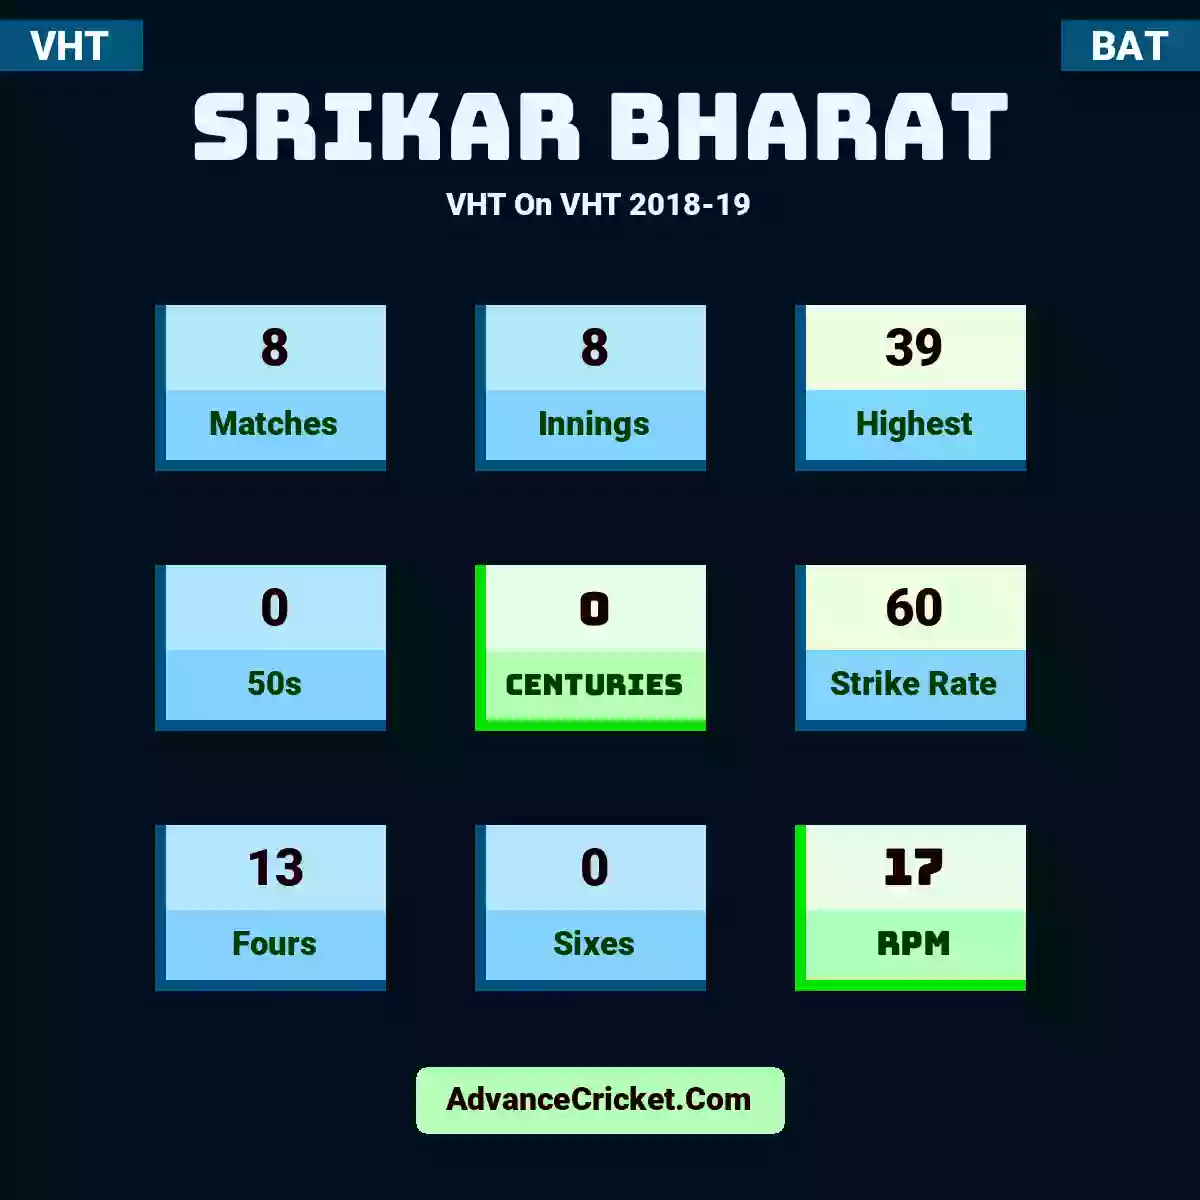 Srikar Bharat VHT  On VHT 2018-19, Srikar Bharat played 8 matches, scored 39 runs as highest, 0 half-centuries, and 0 centuries, with a strike rate of 60. S.Bharat hit 13 fours and 0 sixes, with an RPM of 17.